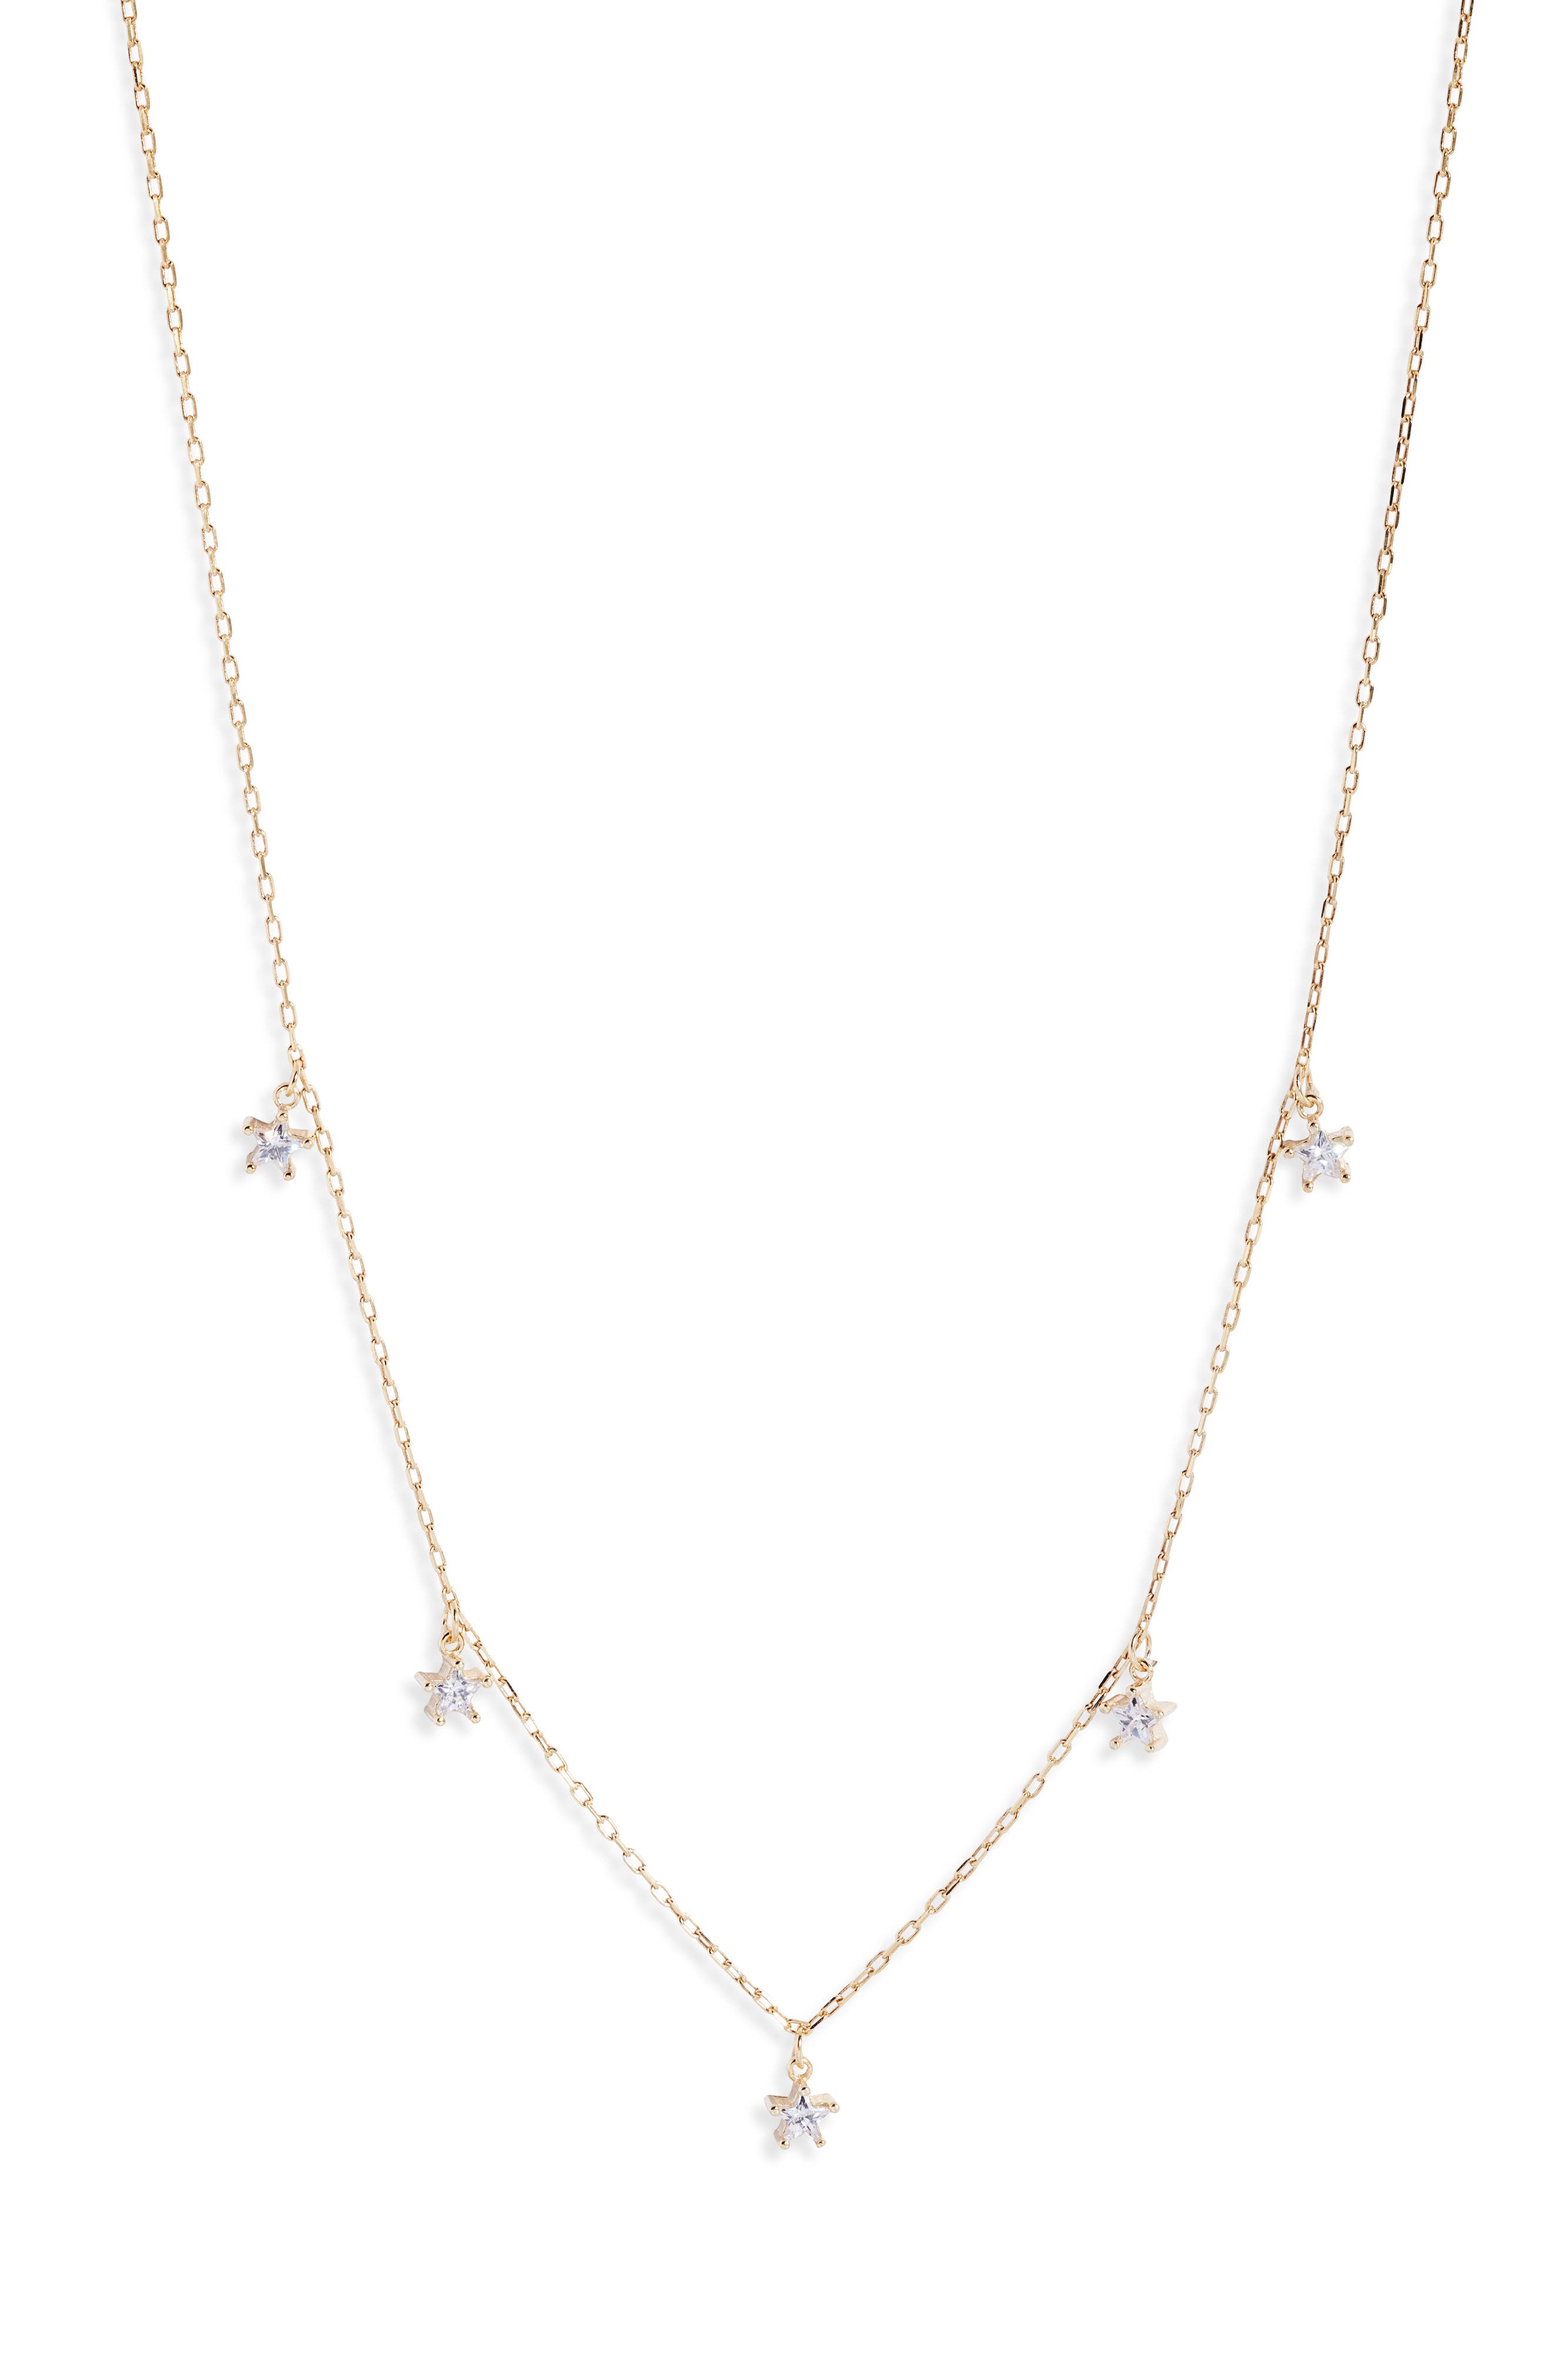 ARGENTO VIVO CUBIC ZIRCONIA STAR CHARM NECKLACE IN GOLD,655789061119